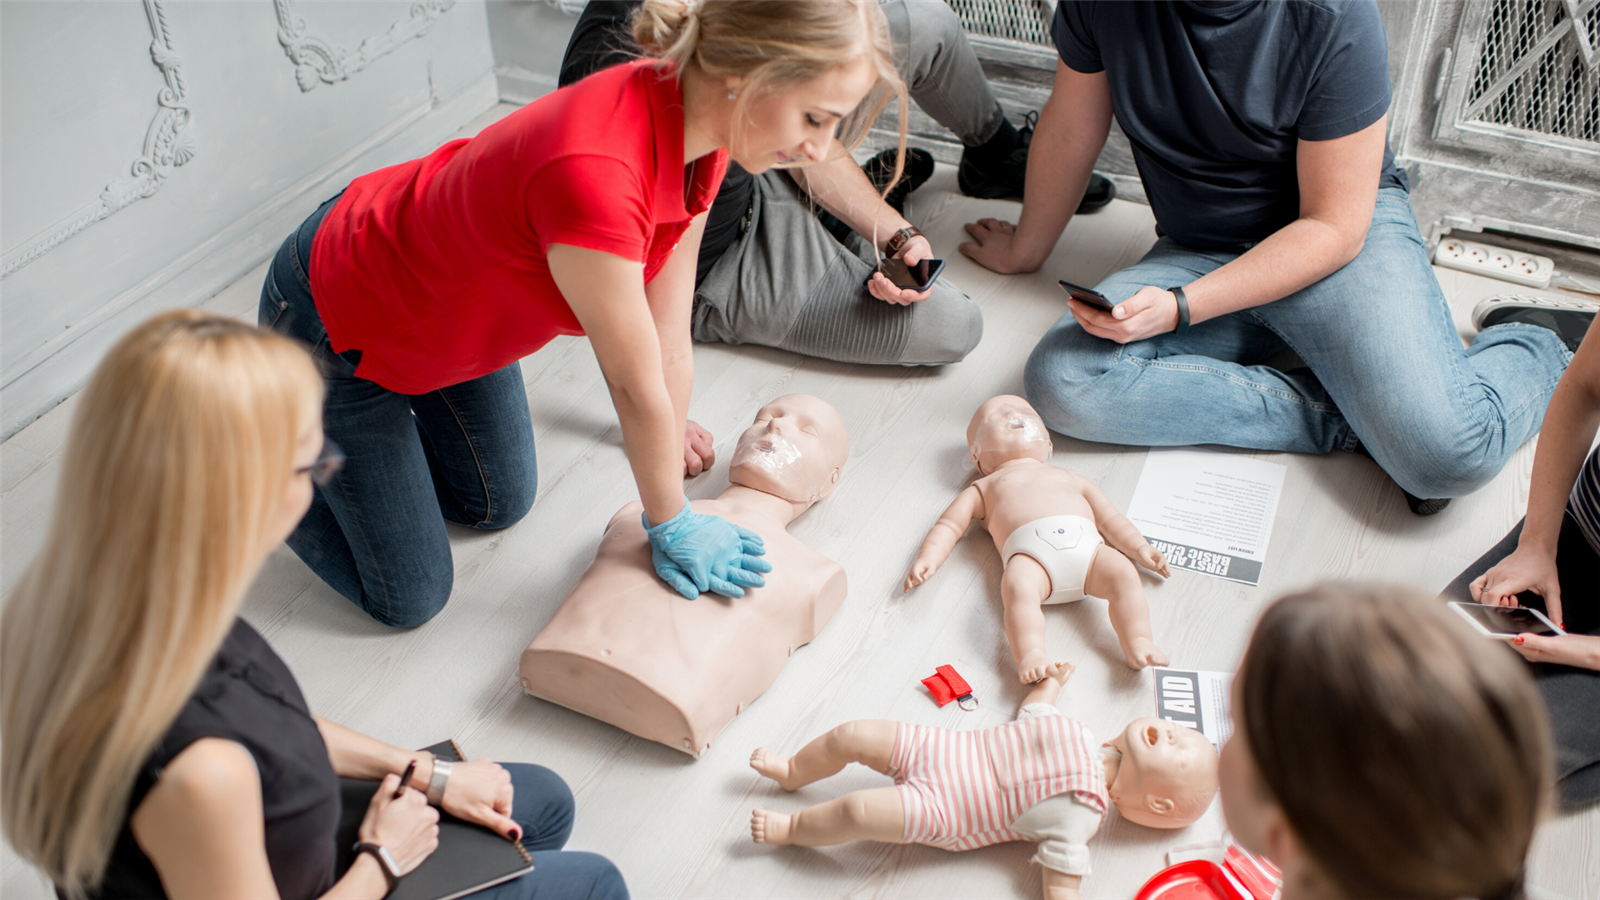 Students practice CPR on medical manikins